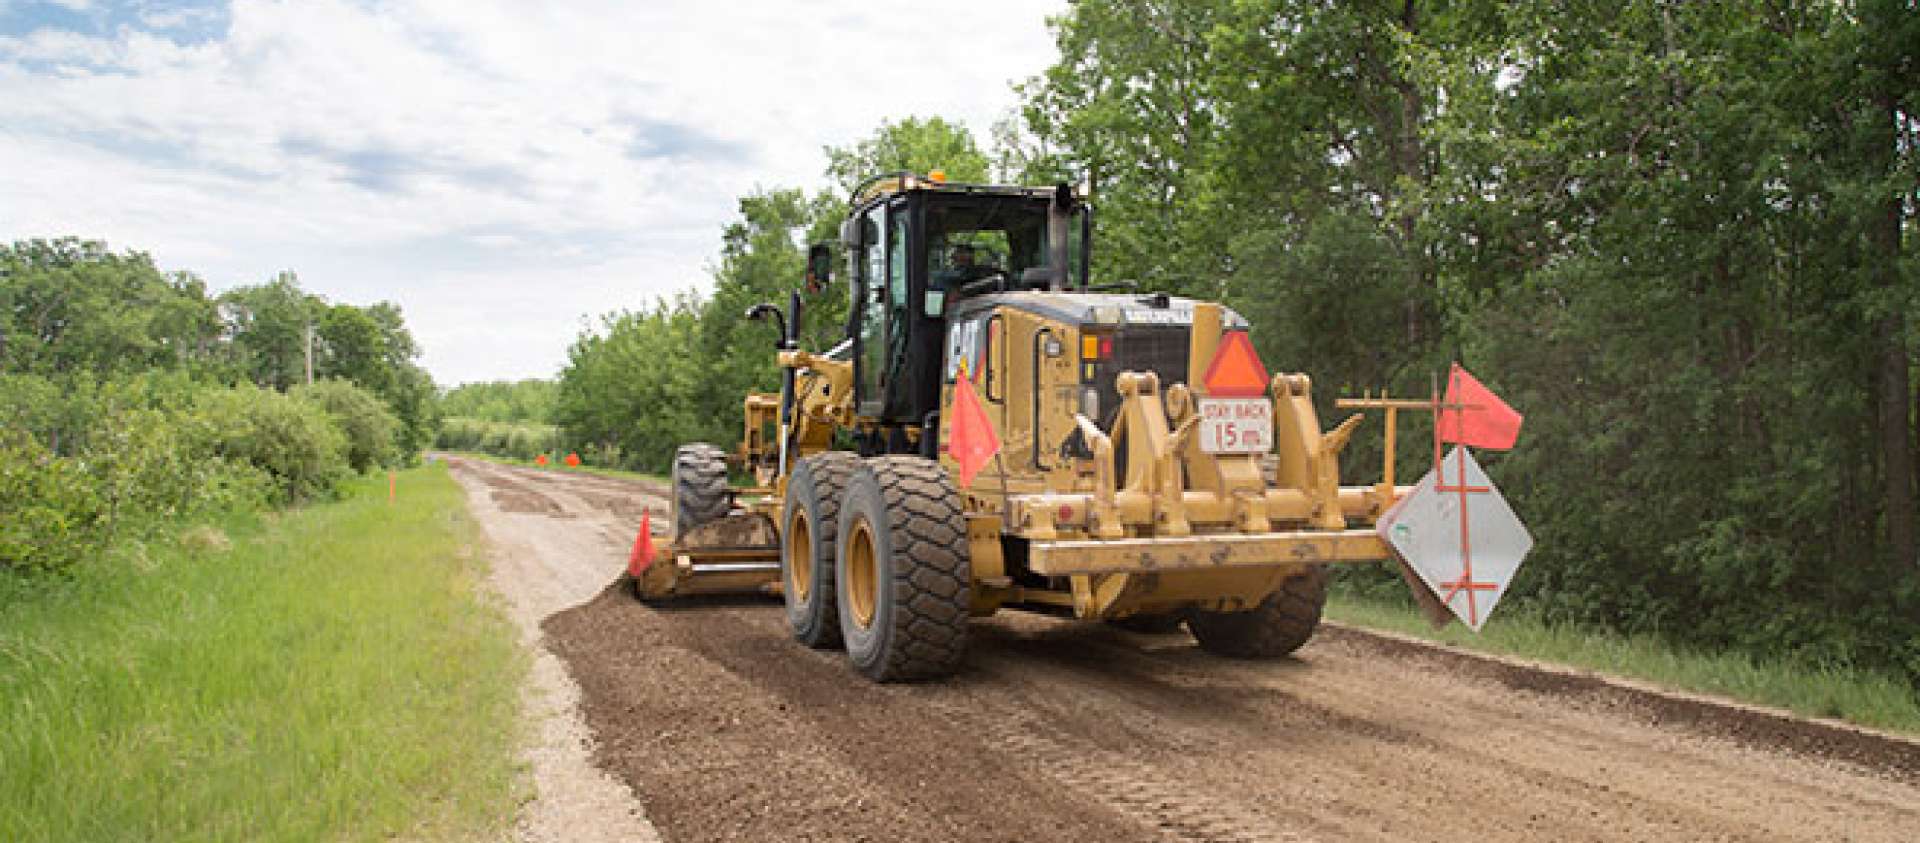 Picture of a vehicle maintaining gravel